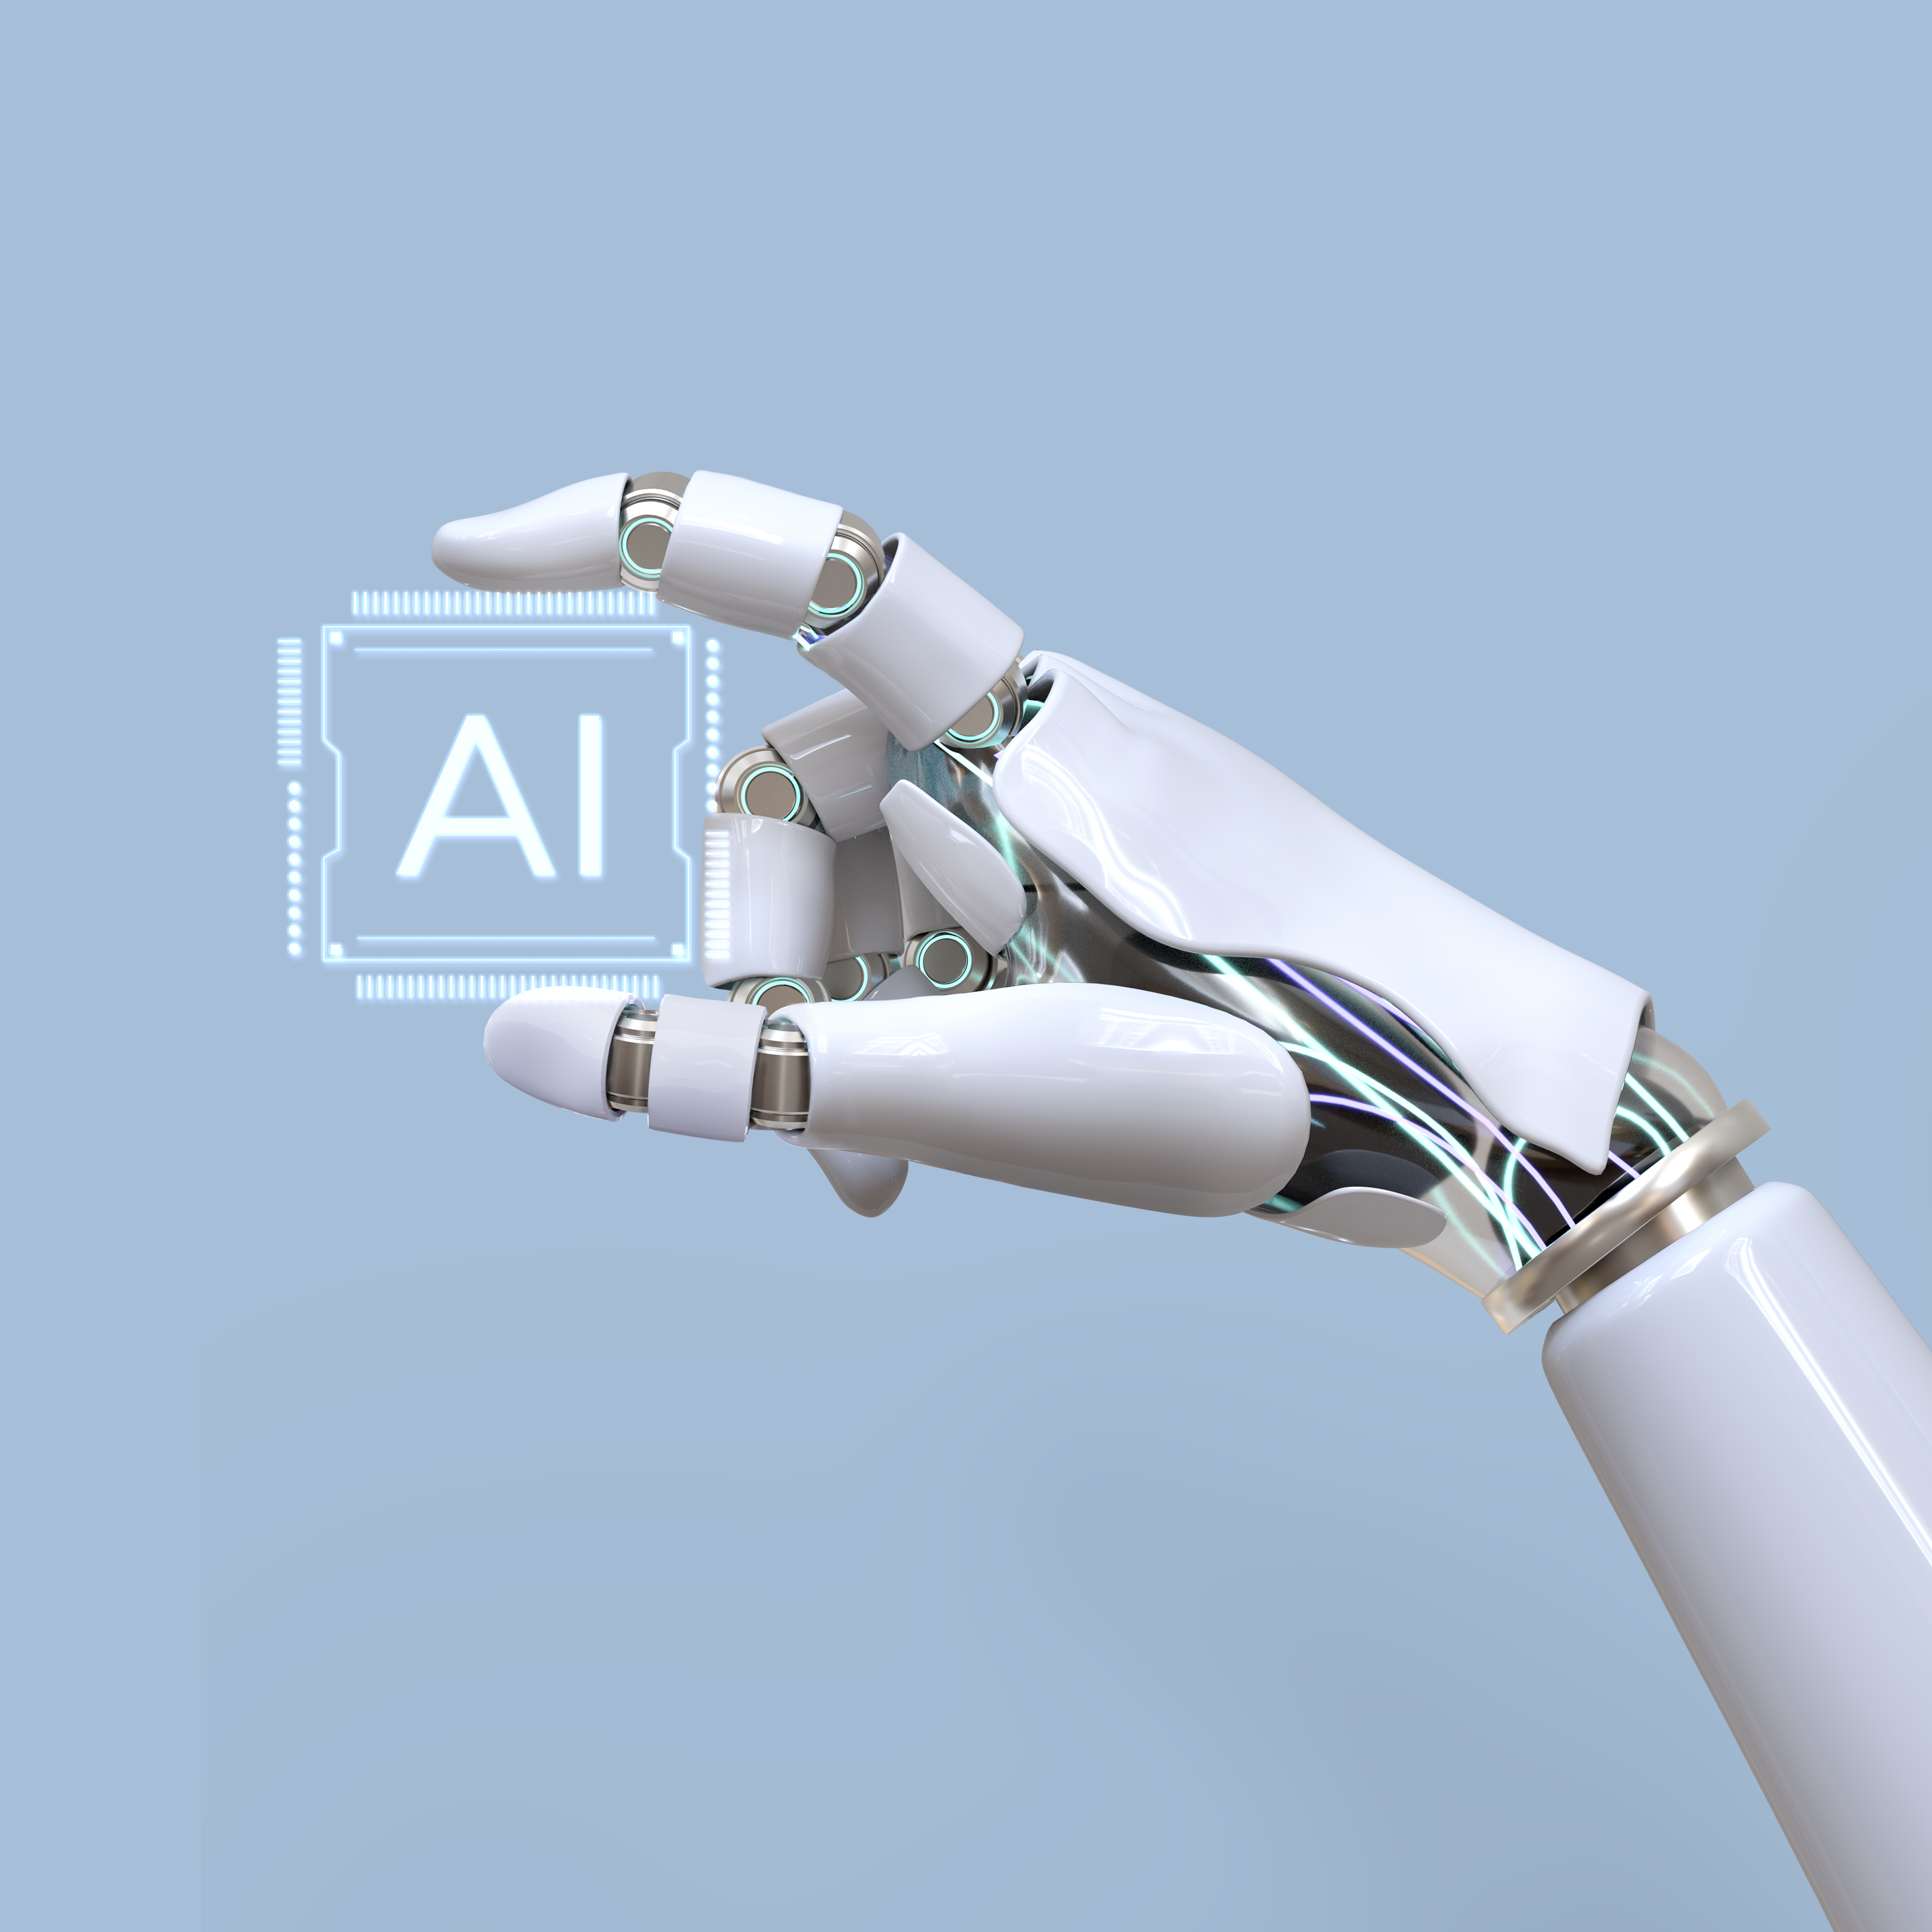 AI is driving the expansion of automation